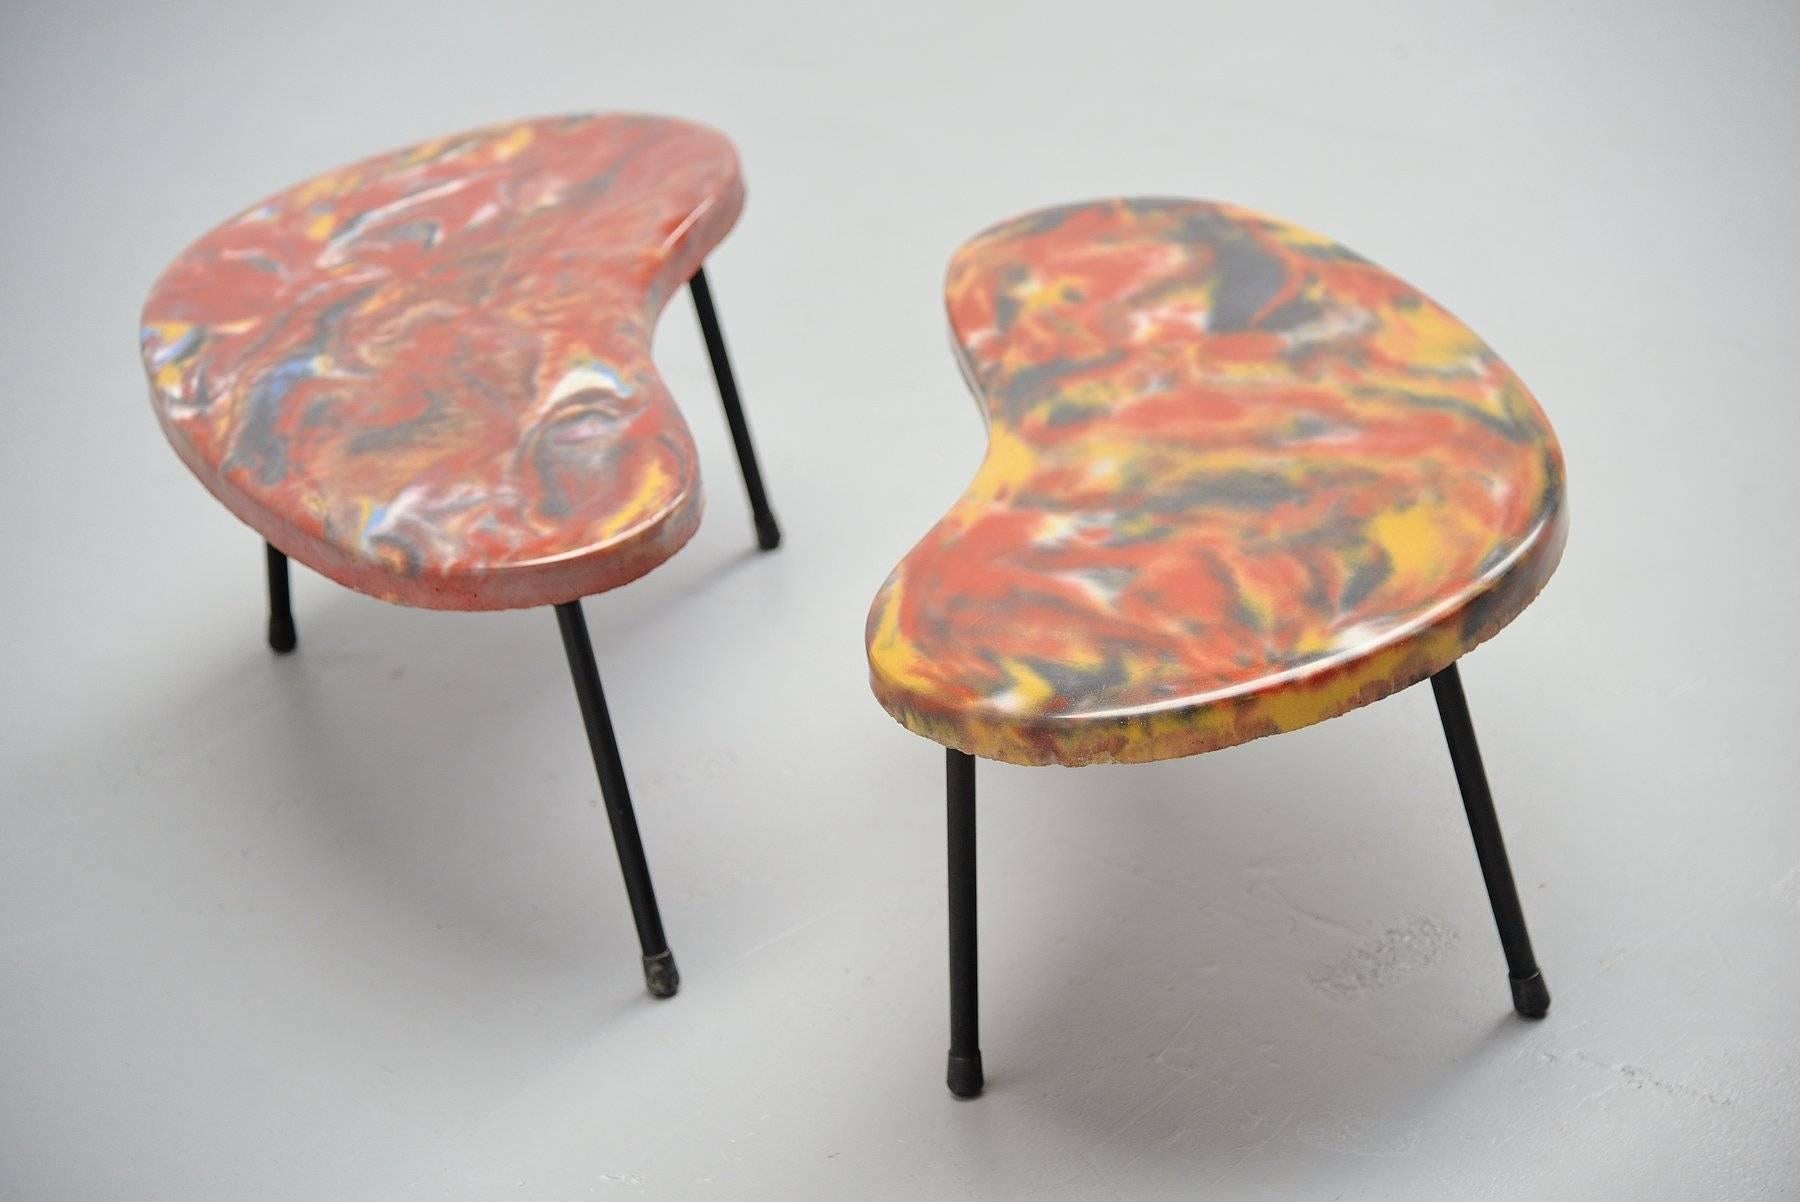 Very special small side tables kidney shaped, France, 1960. These tables are very special, I cannot find anything on the internet that comes close to these. They are made of solid concrete, painted and finished with transparent epoxy. The legs are